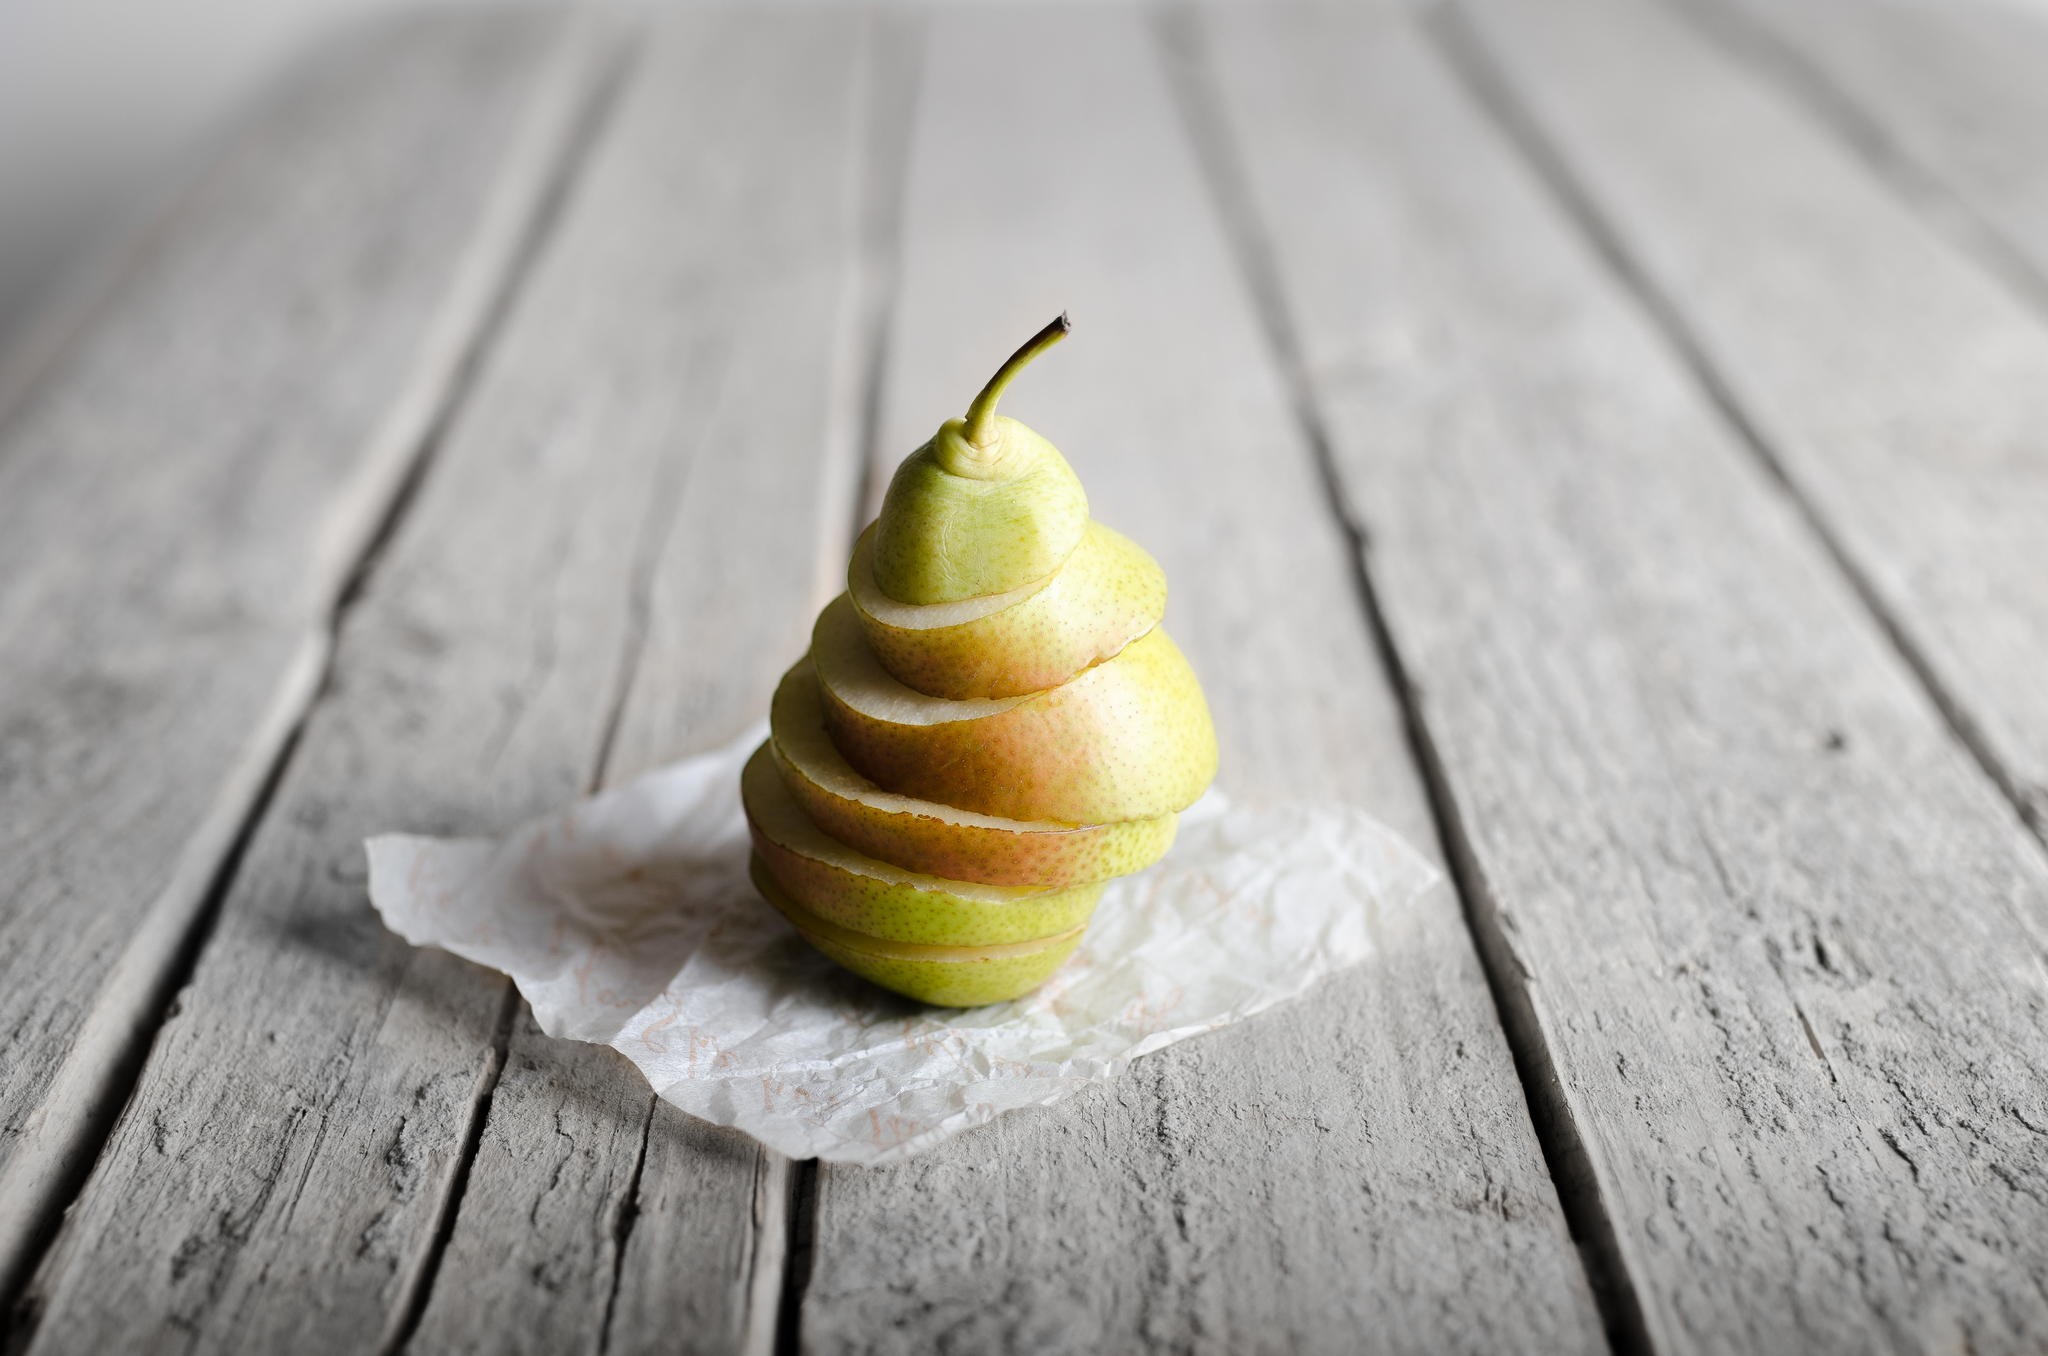 General 2048x1356 photography macro depth of field fruit pears wood paper food wooden surface